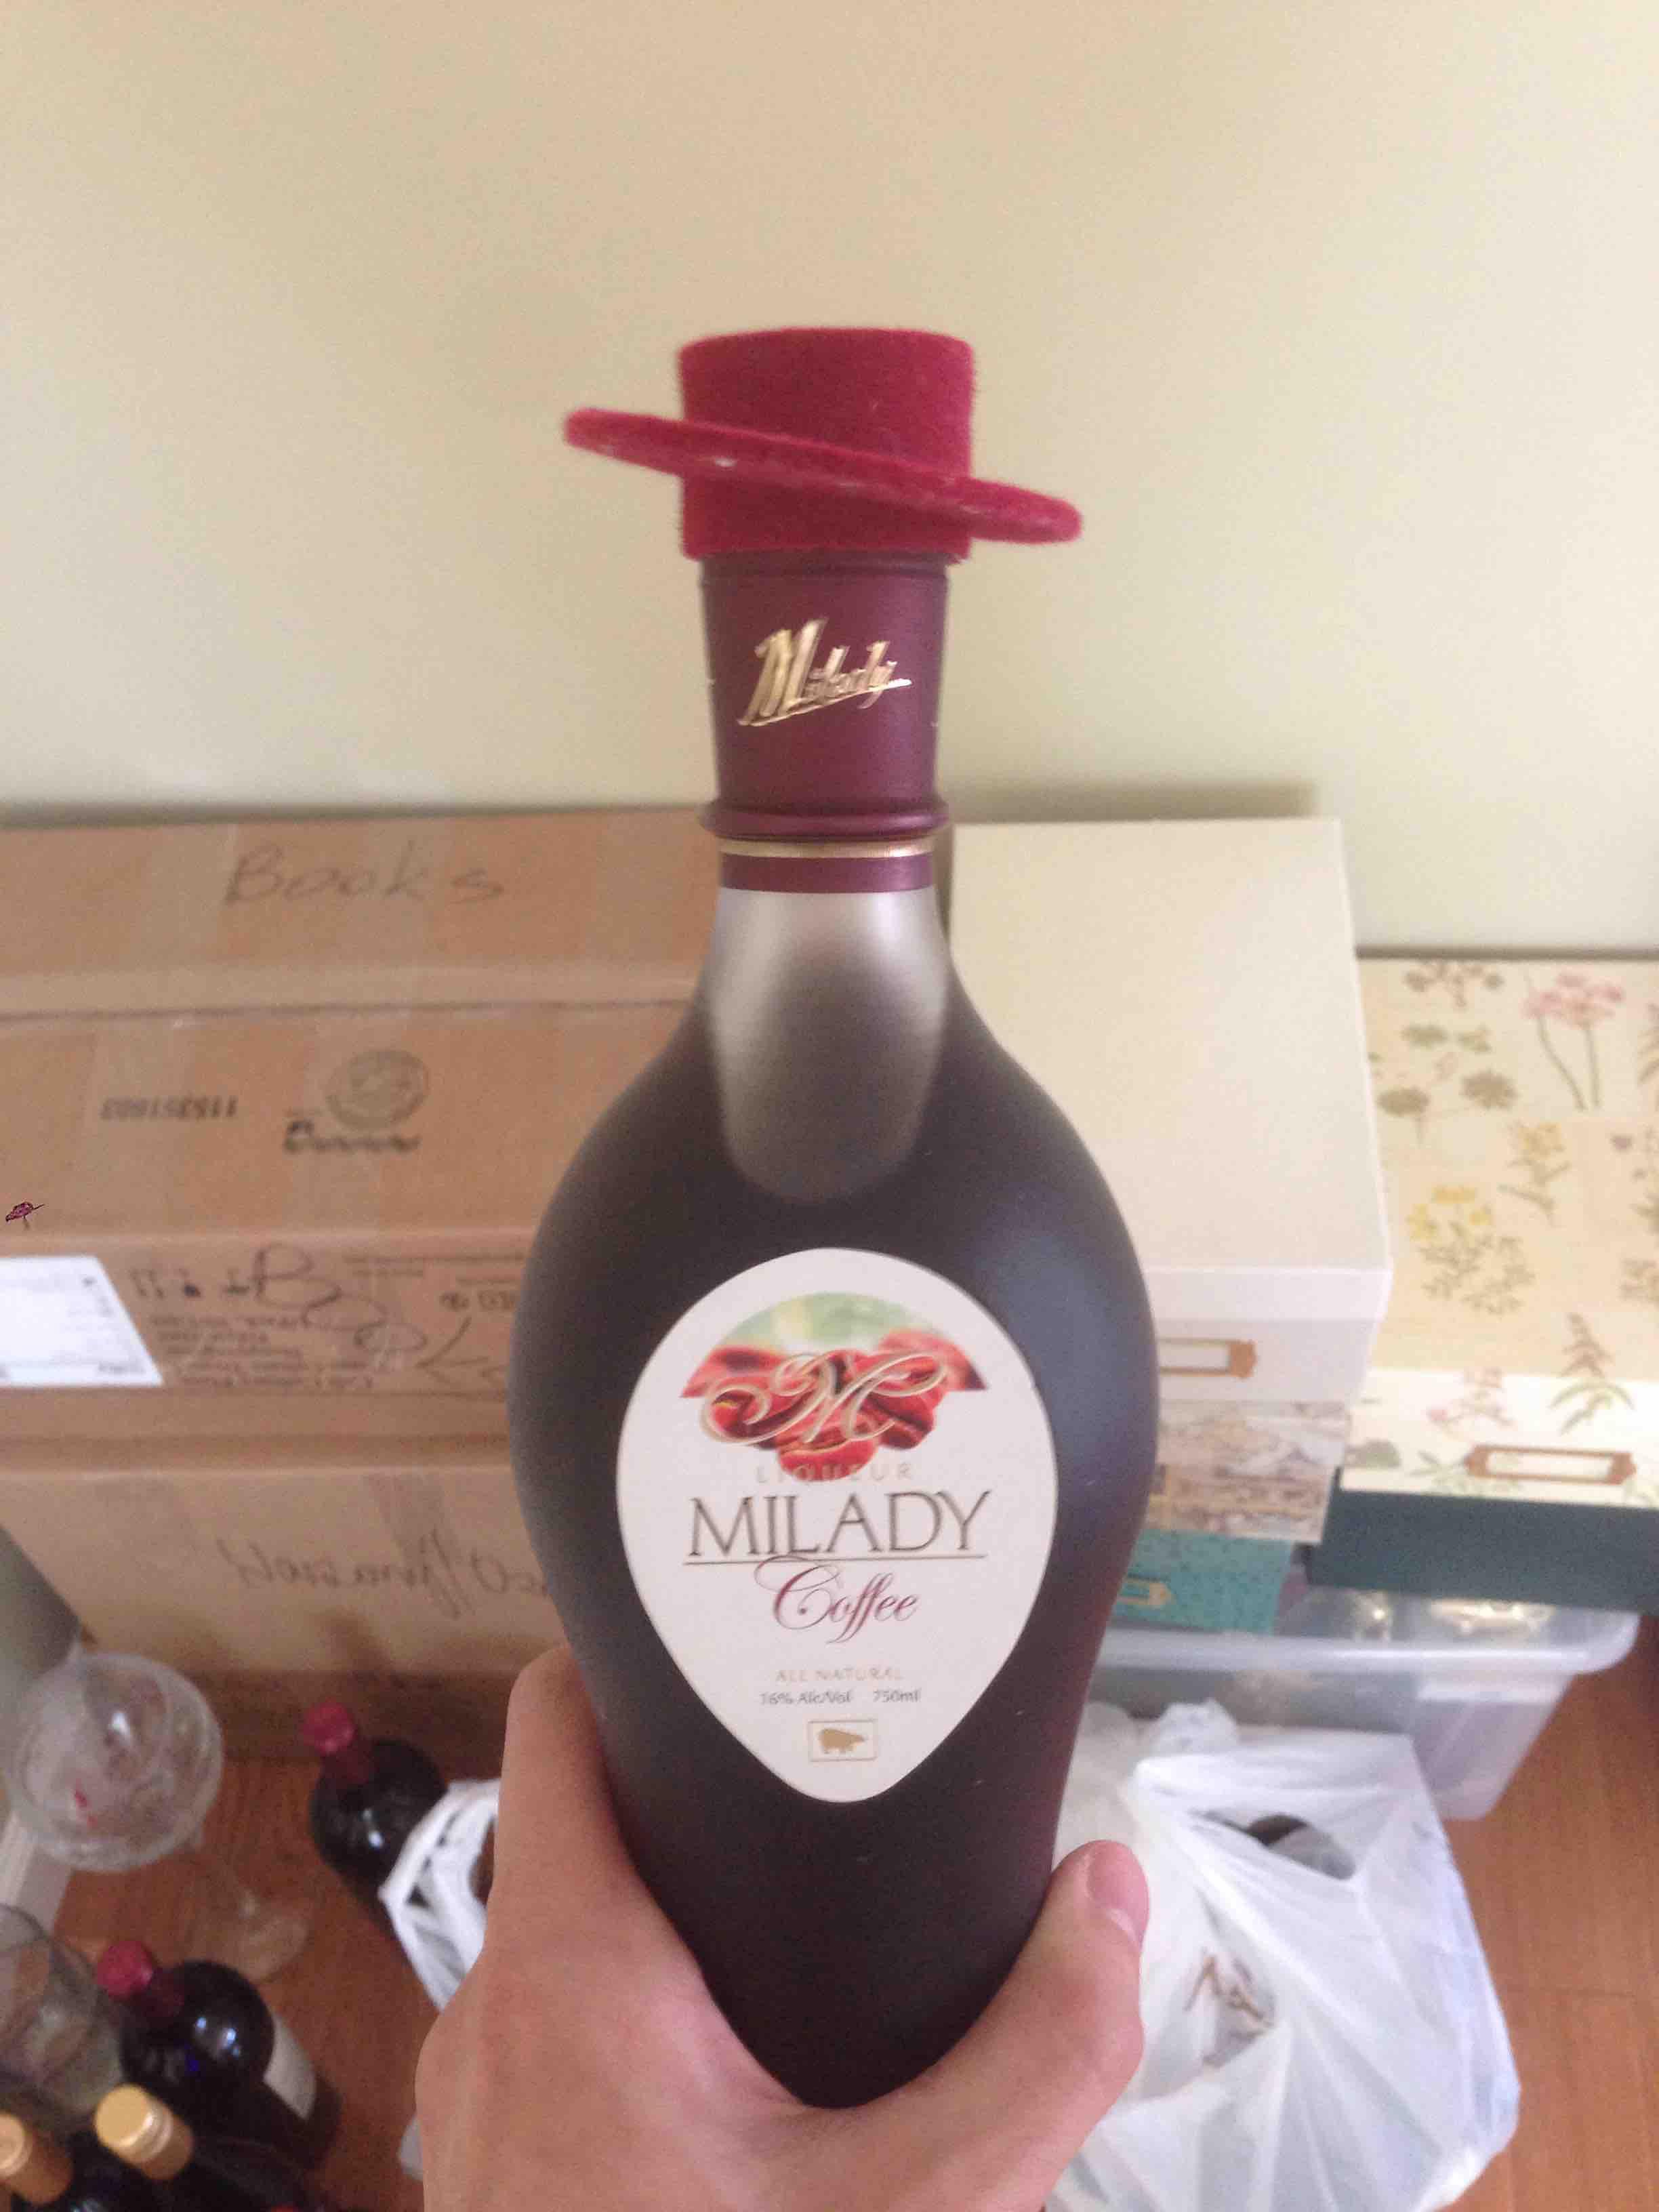 This alcohol pronounced like "m'lady" is wearing a fedora.